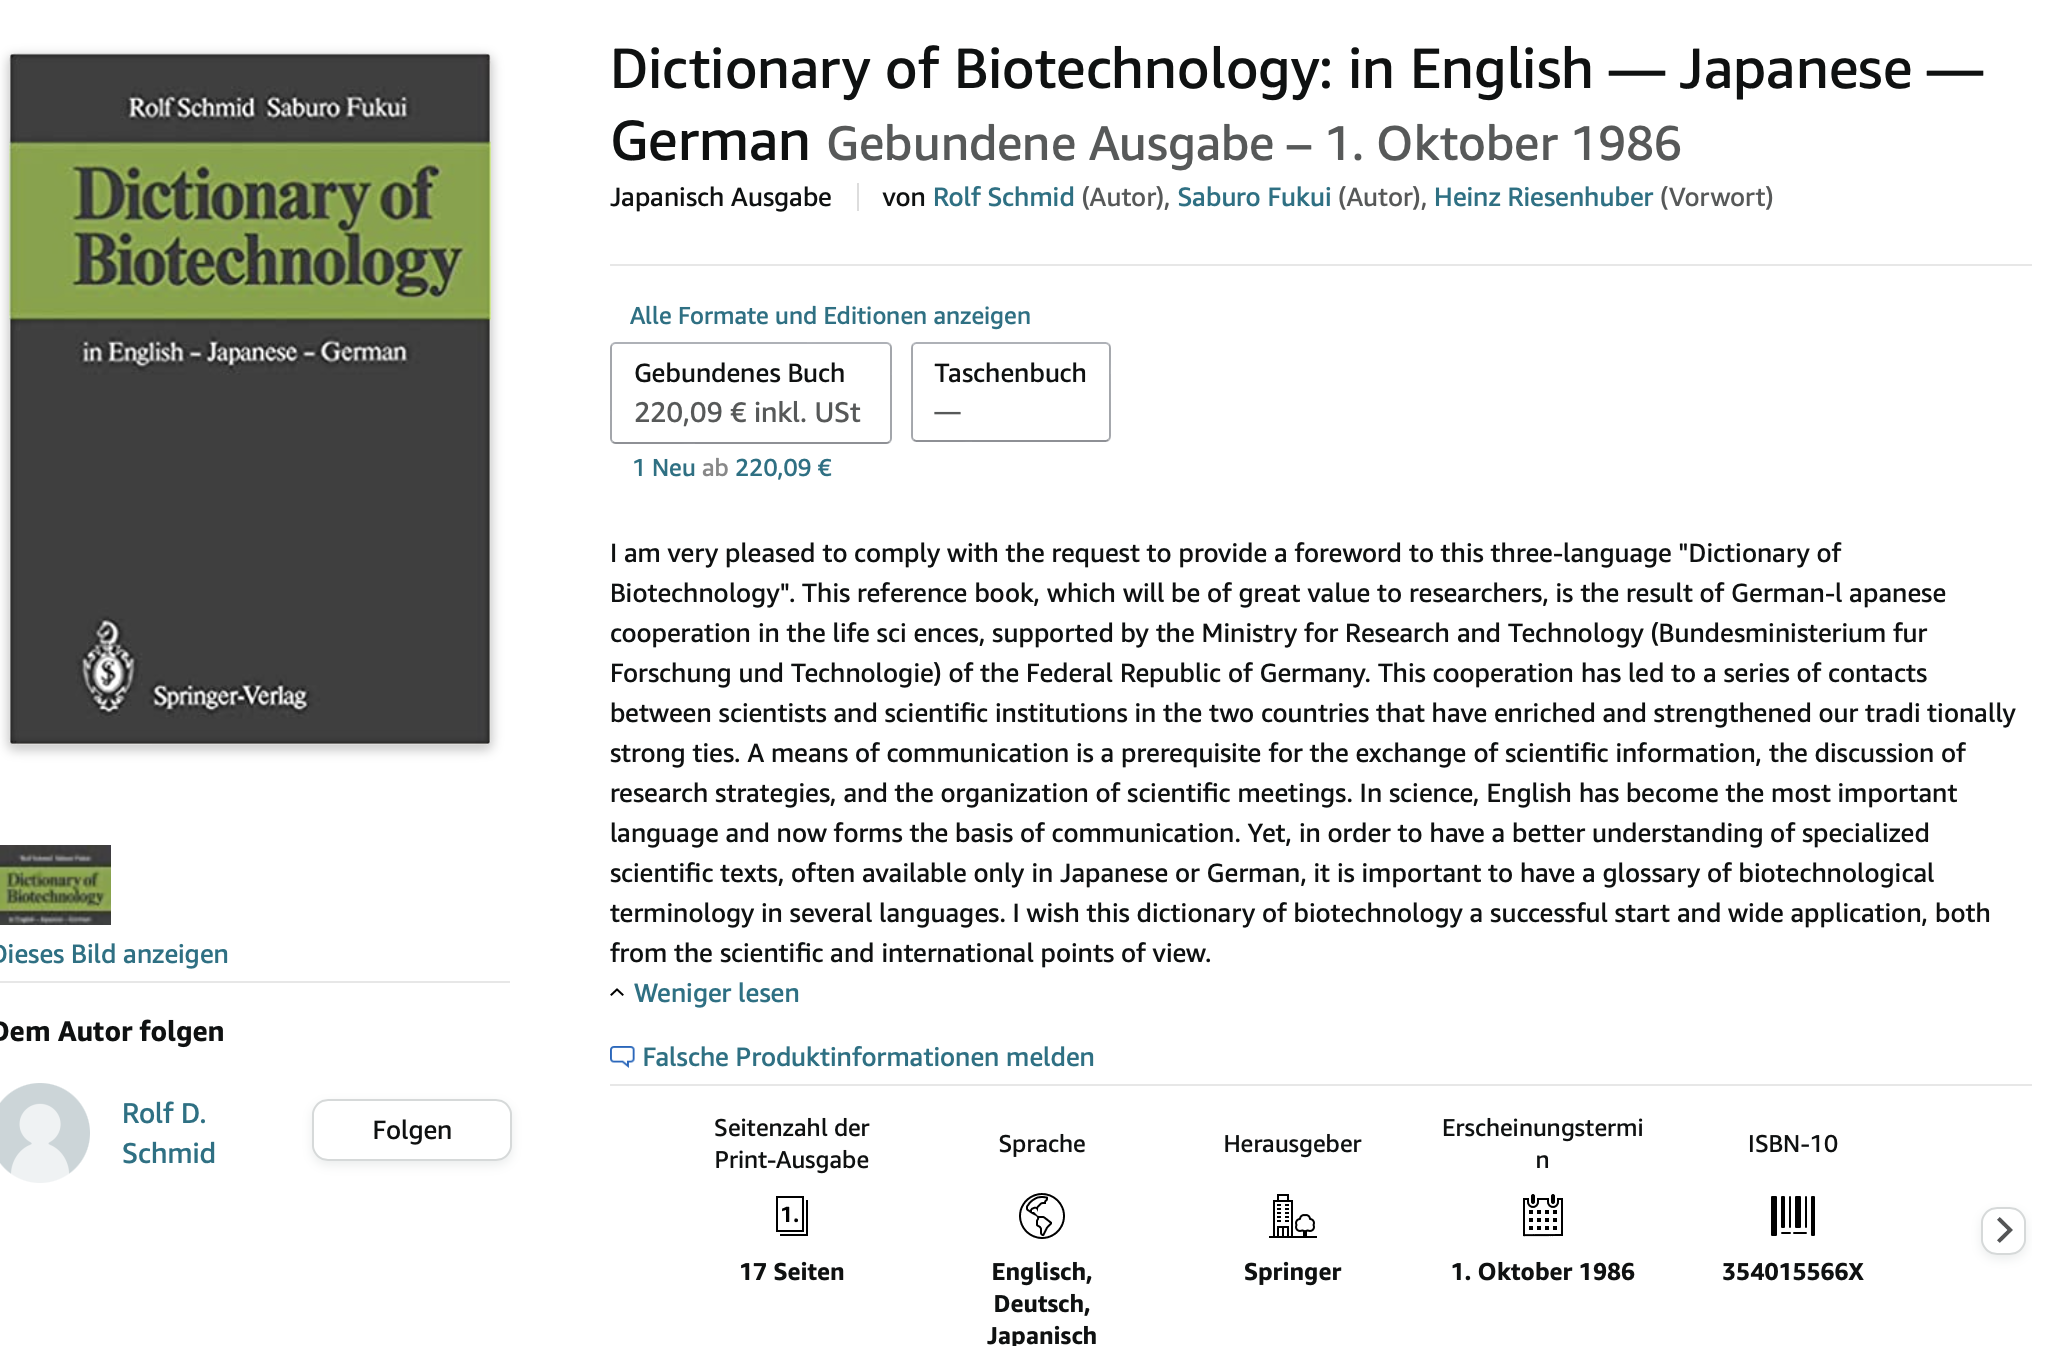 Dictionary of Biotechnology: in English – Japanese German